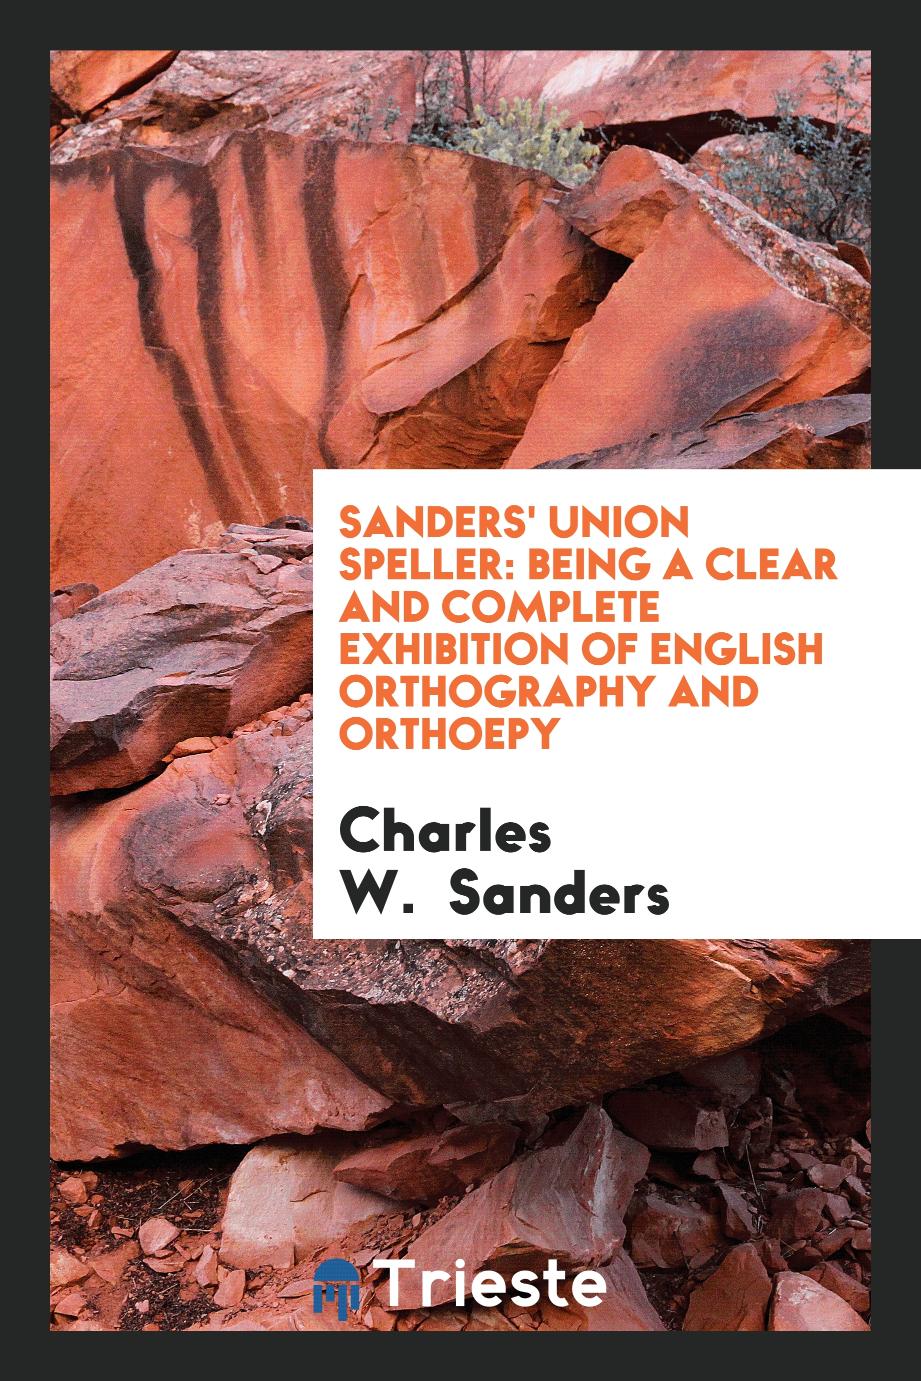 Sanders' Union Speller: Being a Clear and Complete Exhibition of English Orthography and Orthoepy